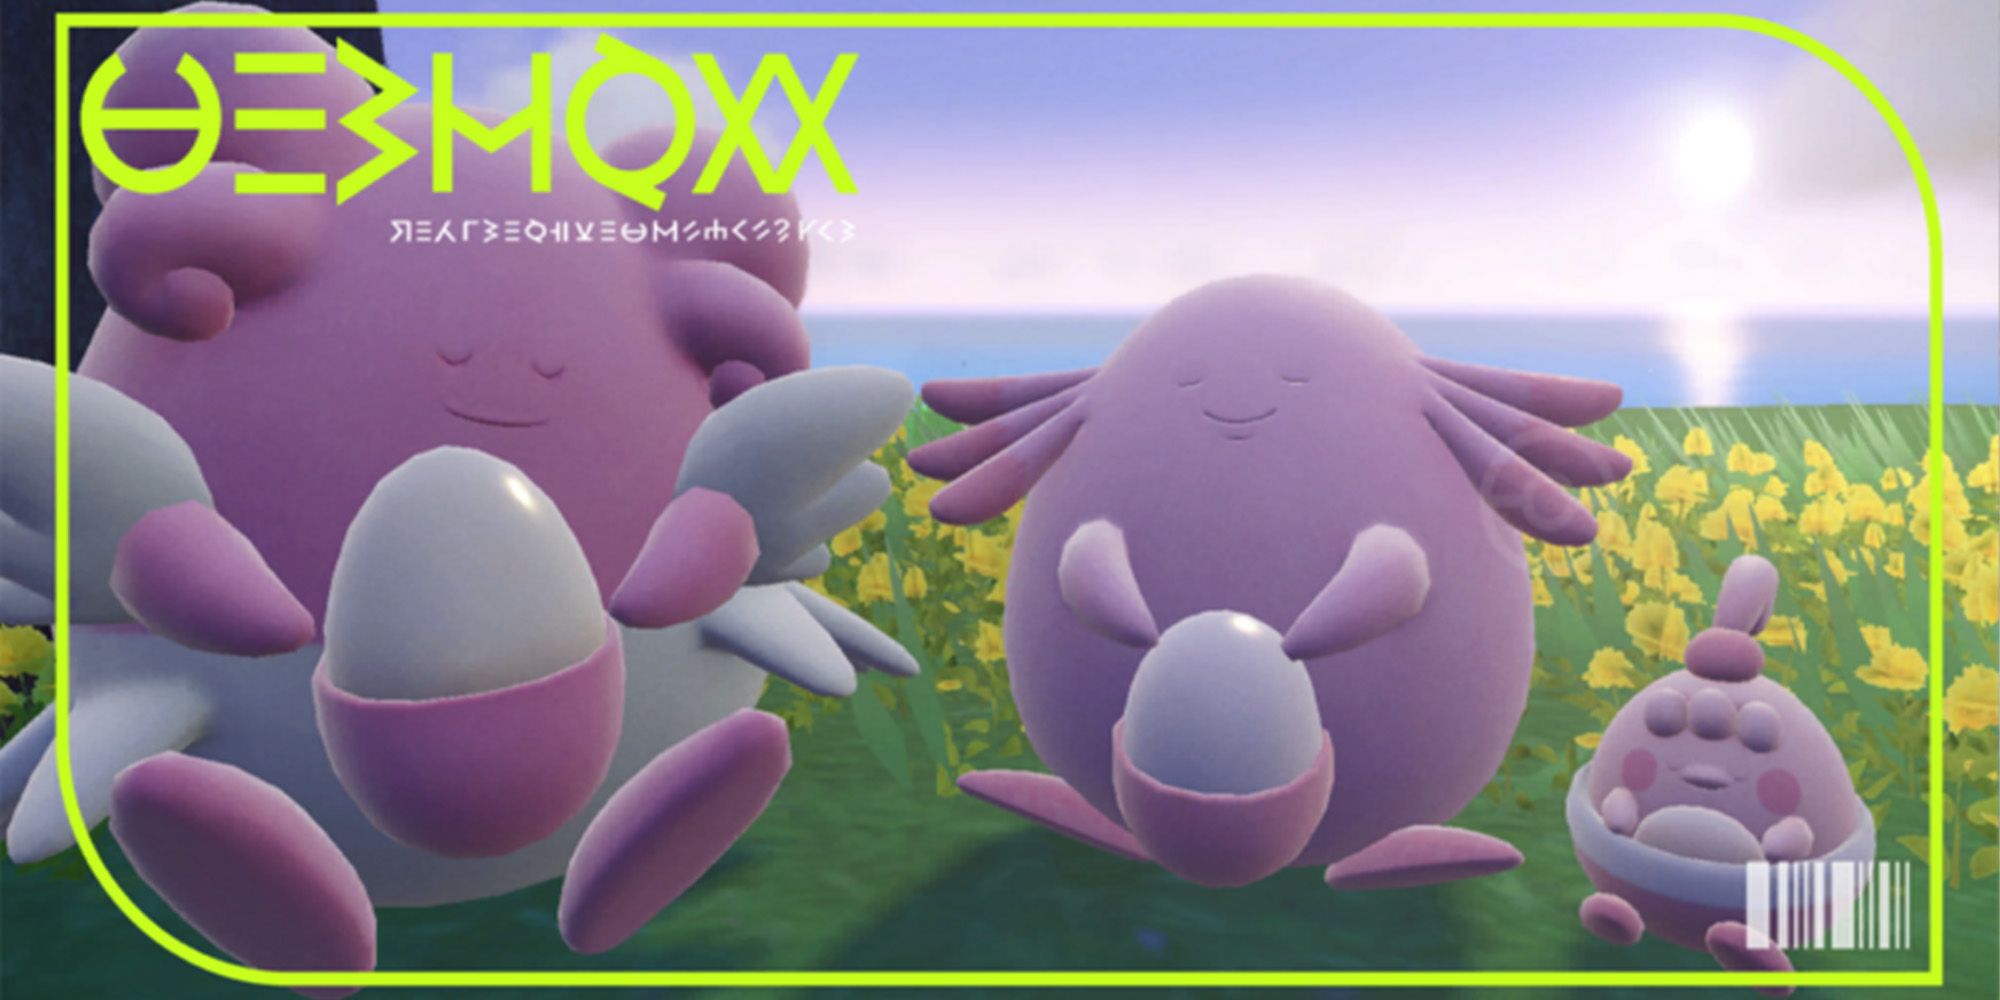 Blissey's Pokedex image in Pokemon Scarlet & Violet shows a Blissey, a Chansey, and a Happiny in a field of yellow flowers in Pokemon Scarlet & Violet.